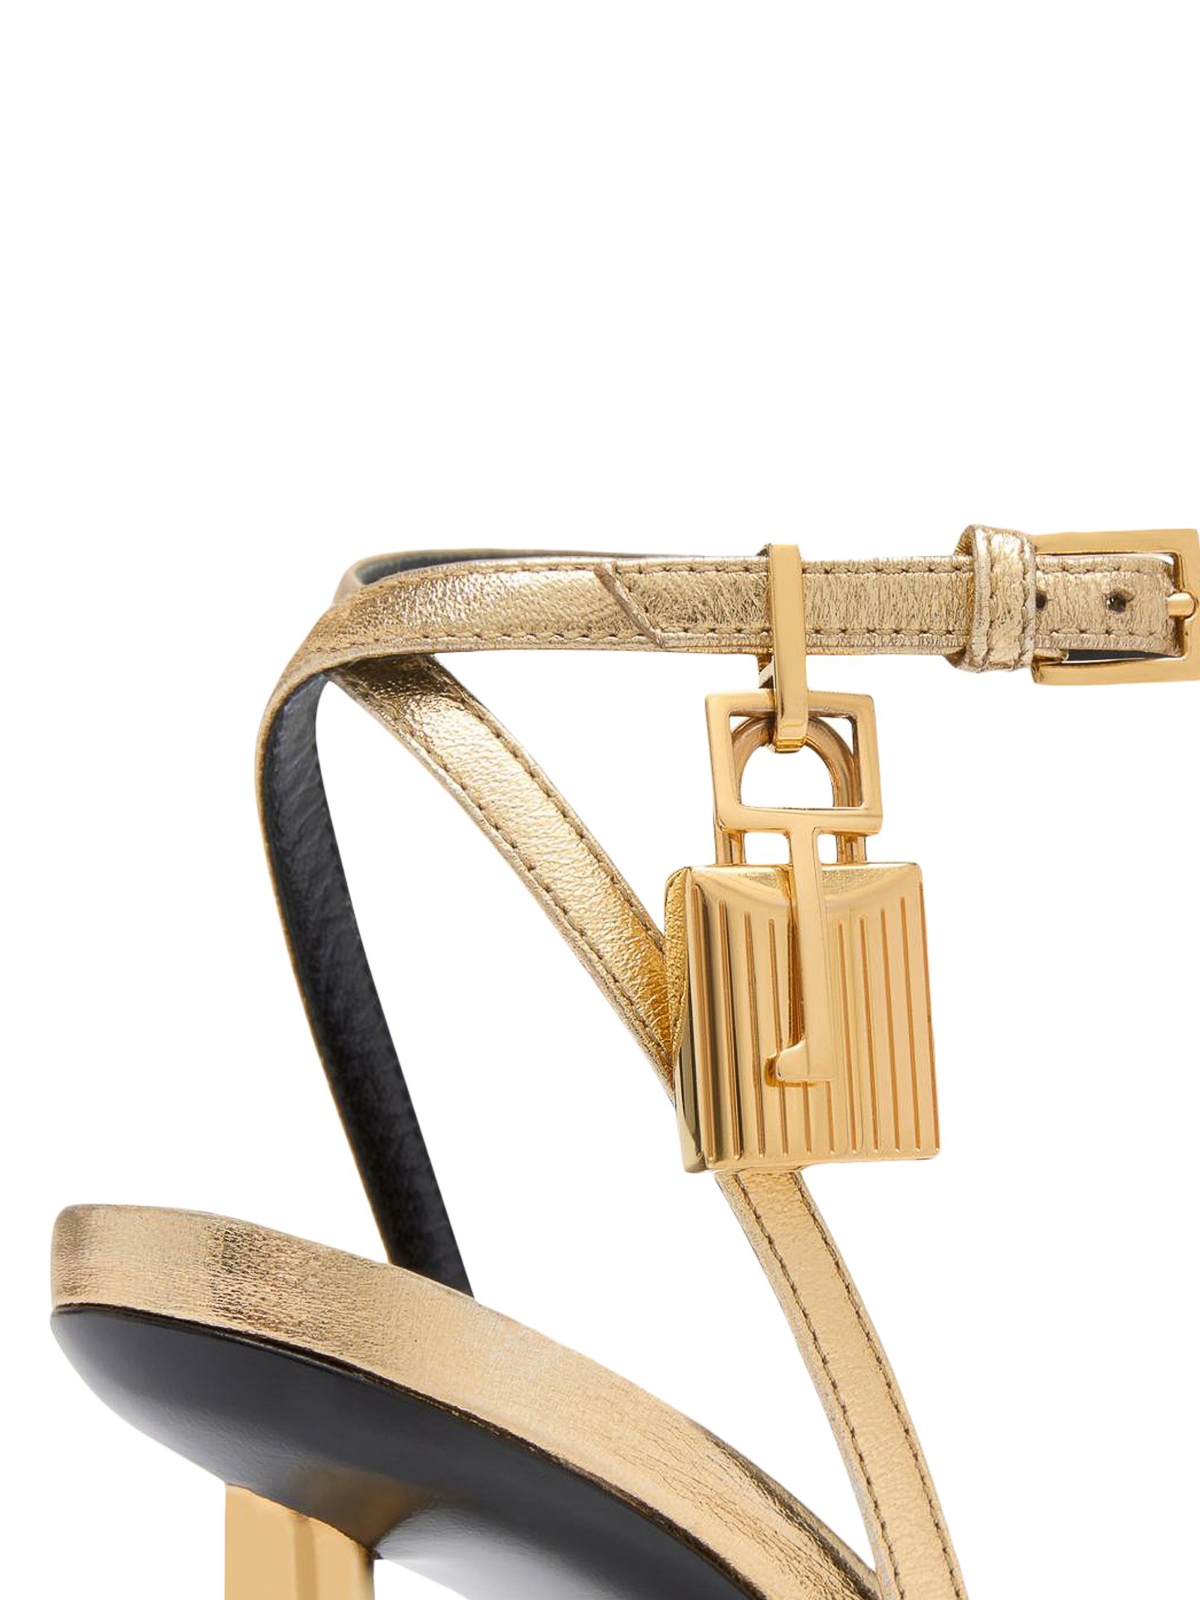 Shop Tom Ford High Heeled Sandals With Charm Strap In Dorado